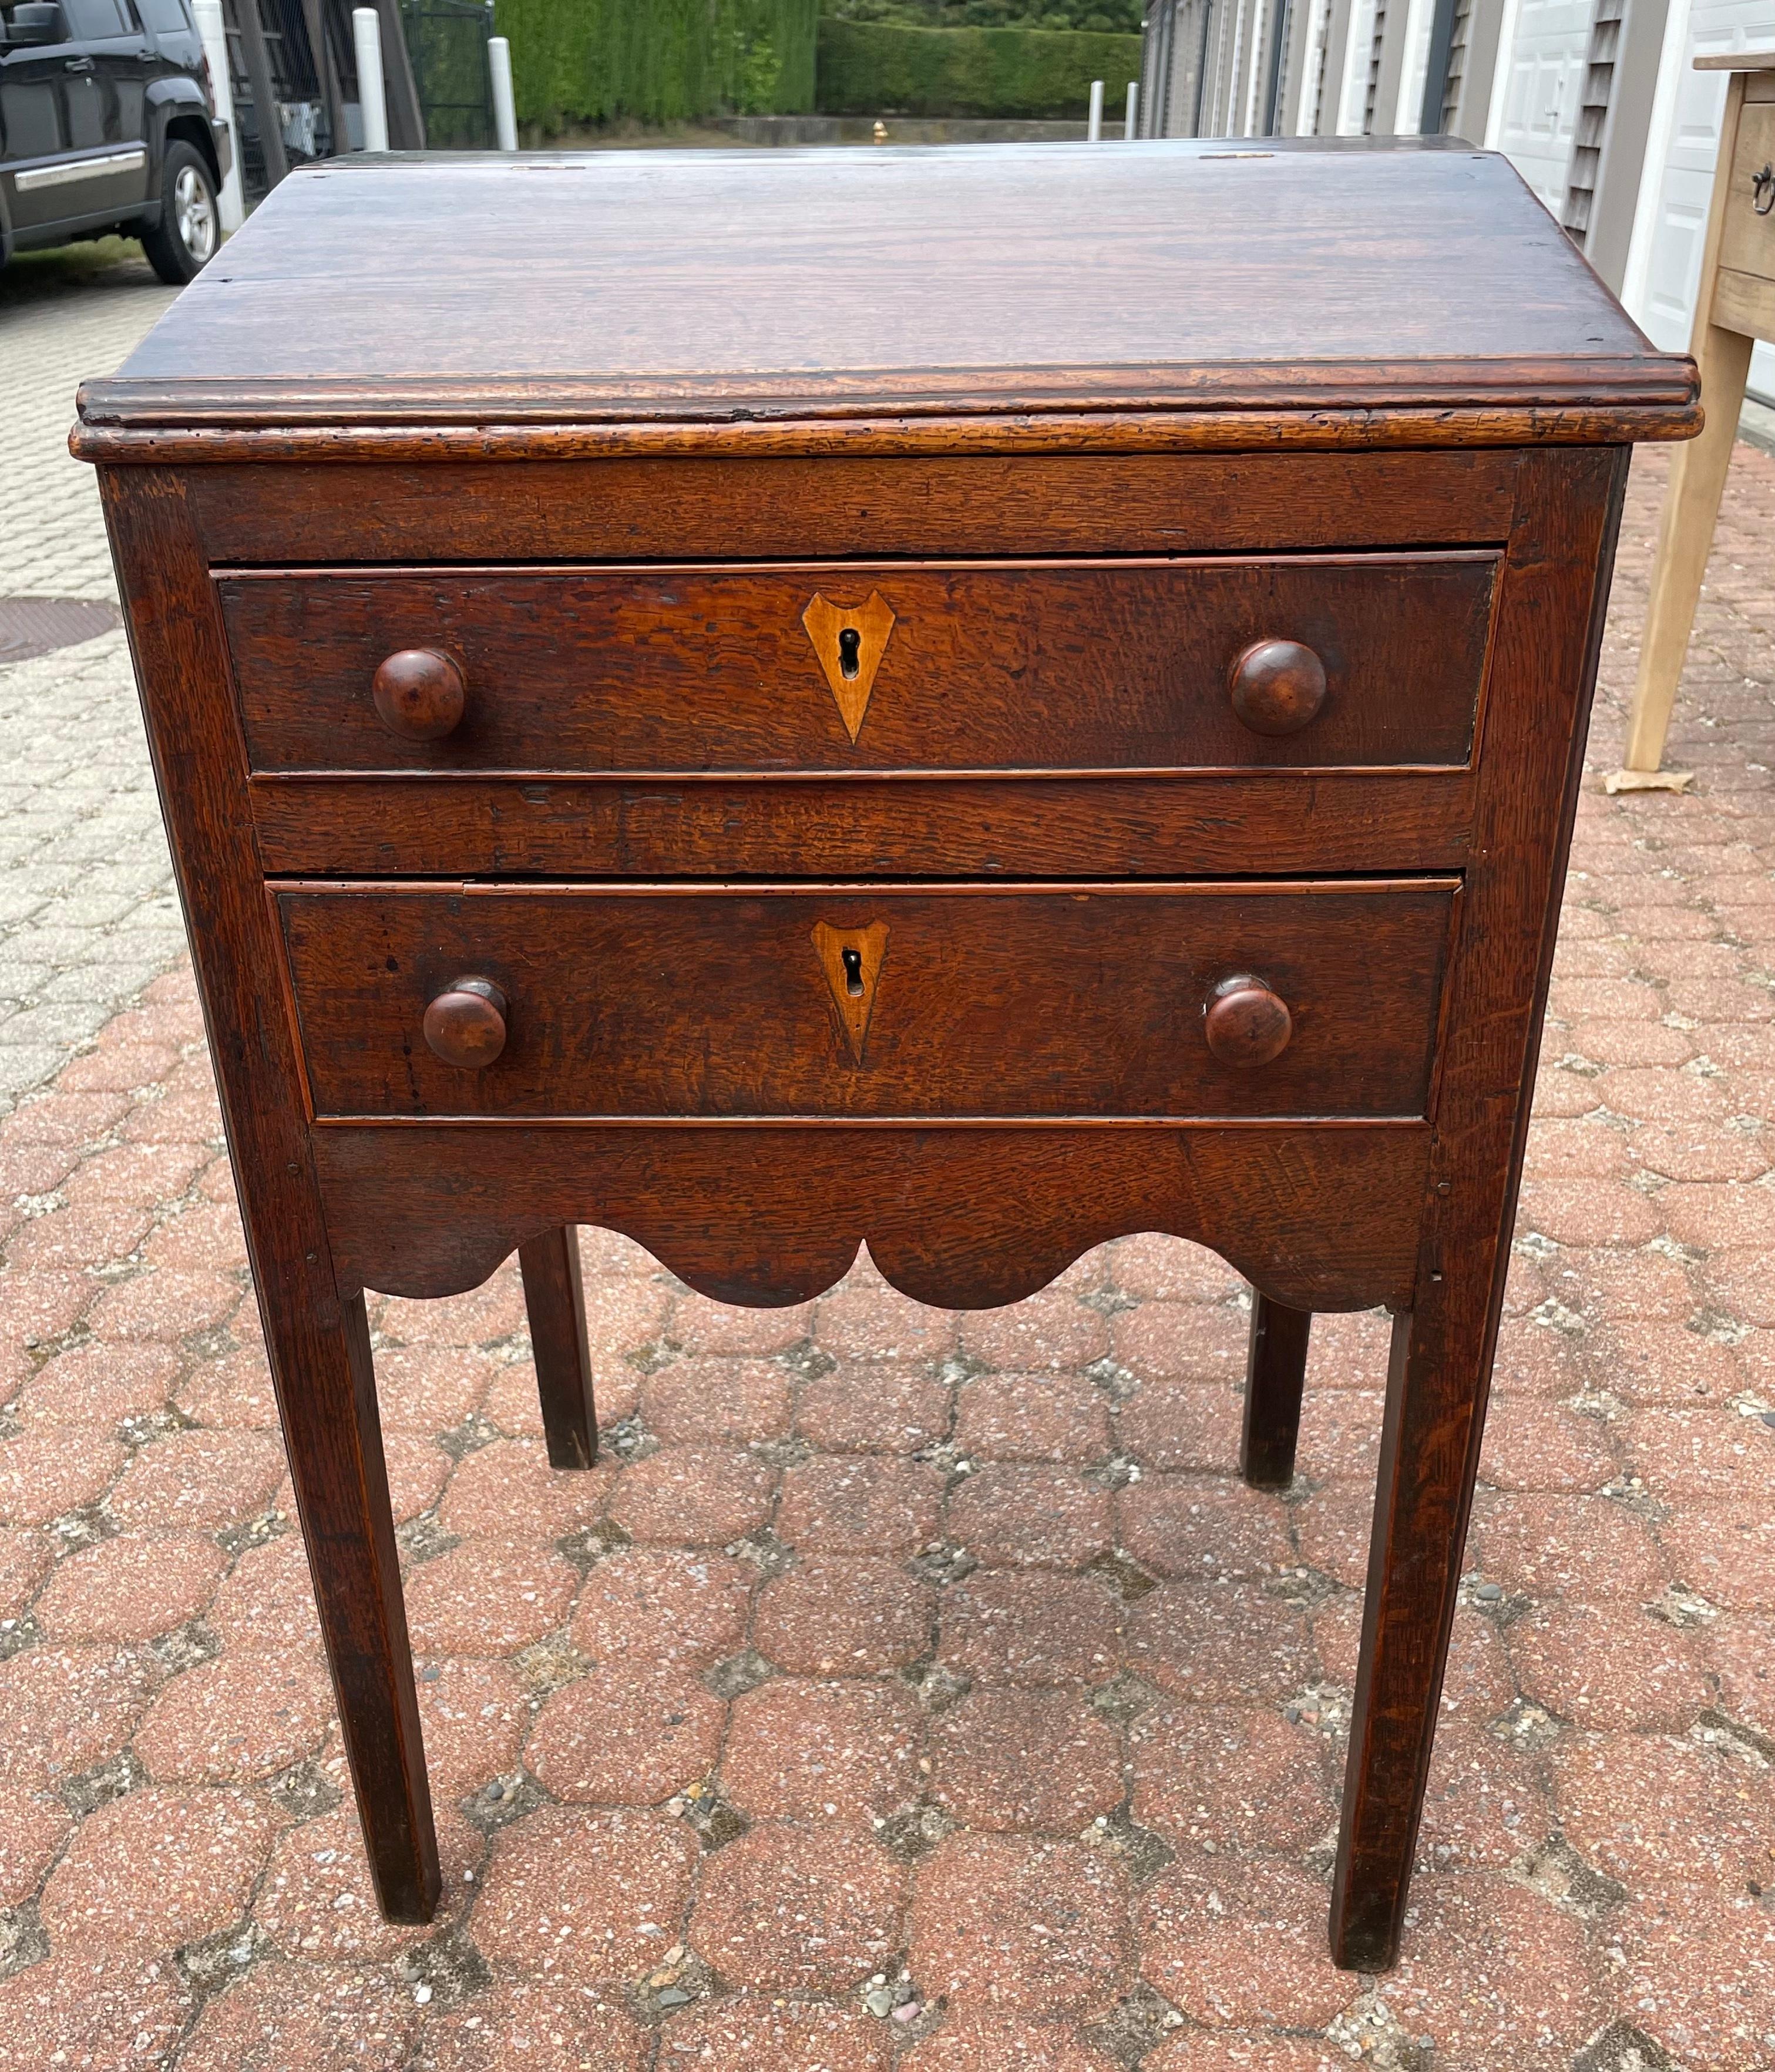 19th century oak school desk or lectern.  Lift top reveals document compartment, over two lower drawers each with inlaid fruitwood key escutcheon (no key).  Nicely shaped skirt at sides and front, on gently tapered legs.